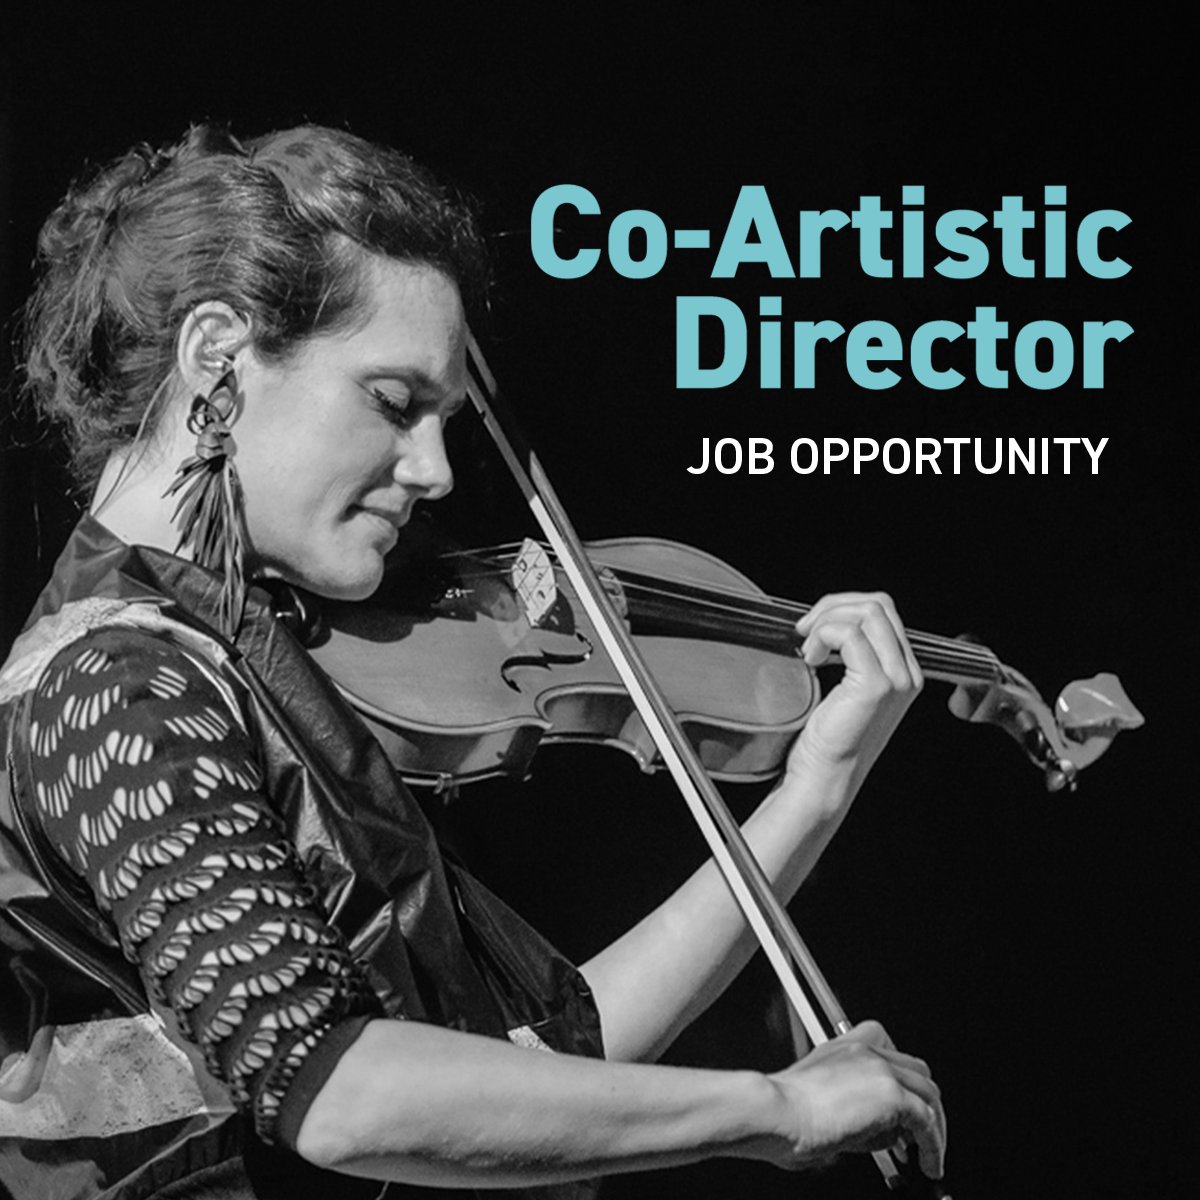 🎺 We're hiring a Co-Artistic Director! A natural collaborator with fire in their belly, passionate about music/art. You'll develop artistic strategy & grow our network. You'll also shape seasons with violinist, composer & founder Rakhi Singh. Apply: manchestercollective.co.uk/jobs